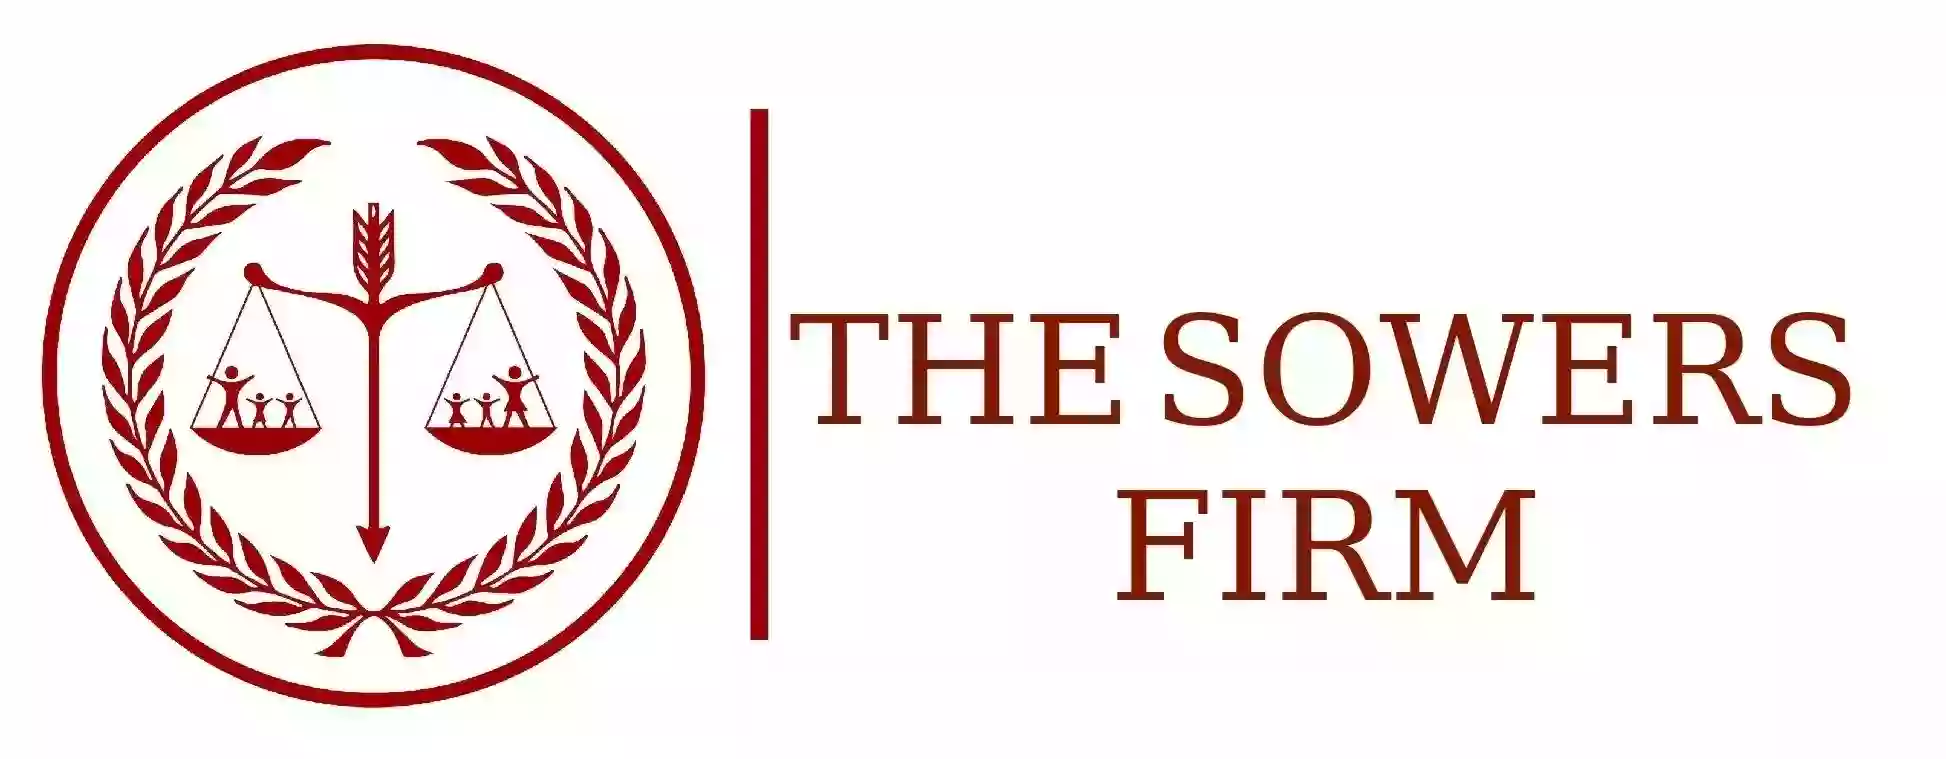 The Sowers Firm